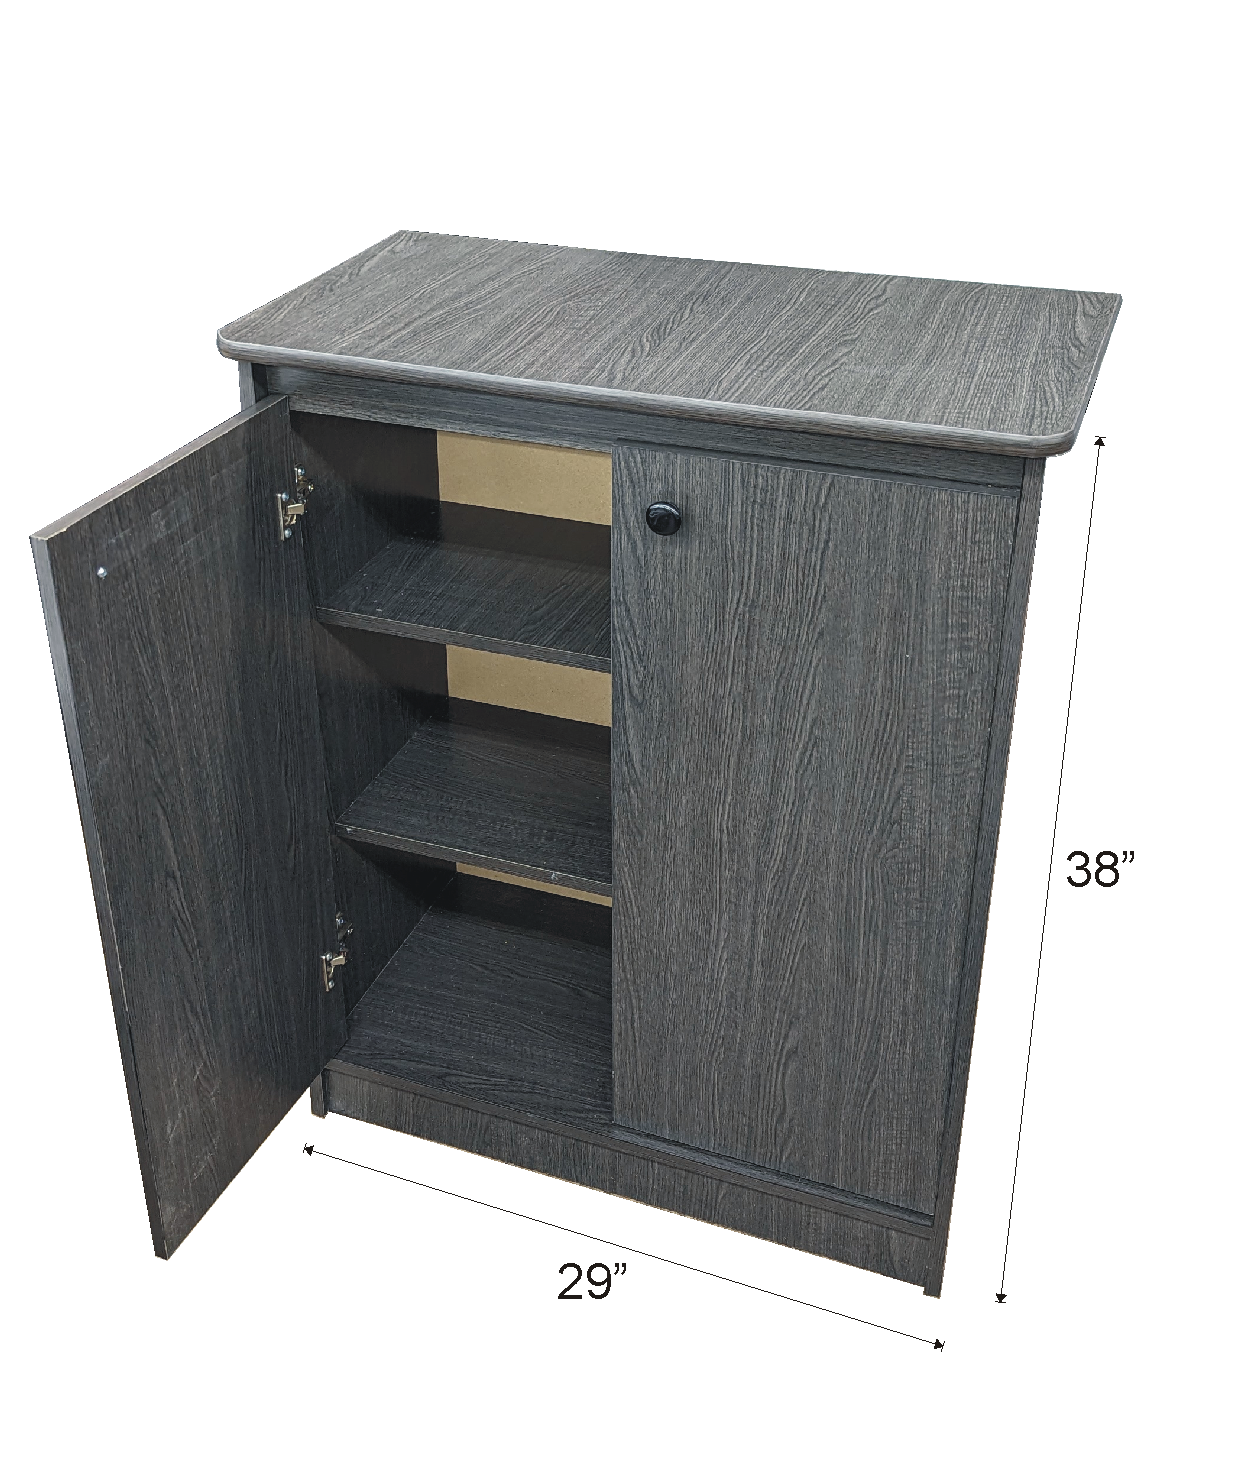 STR 3037 Storage Unit - Available in various colours